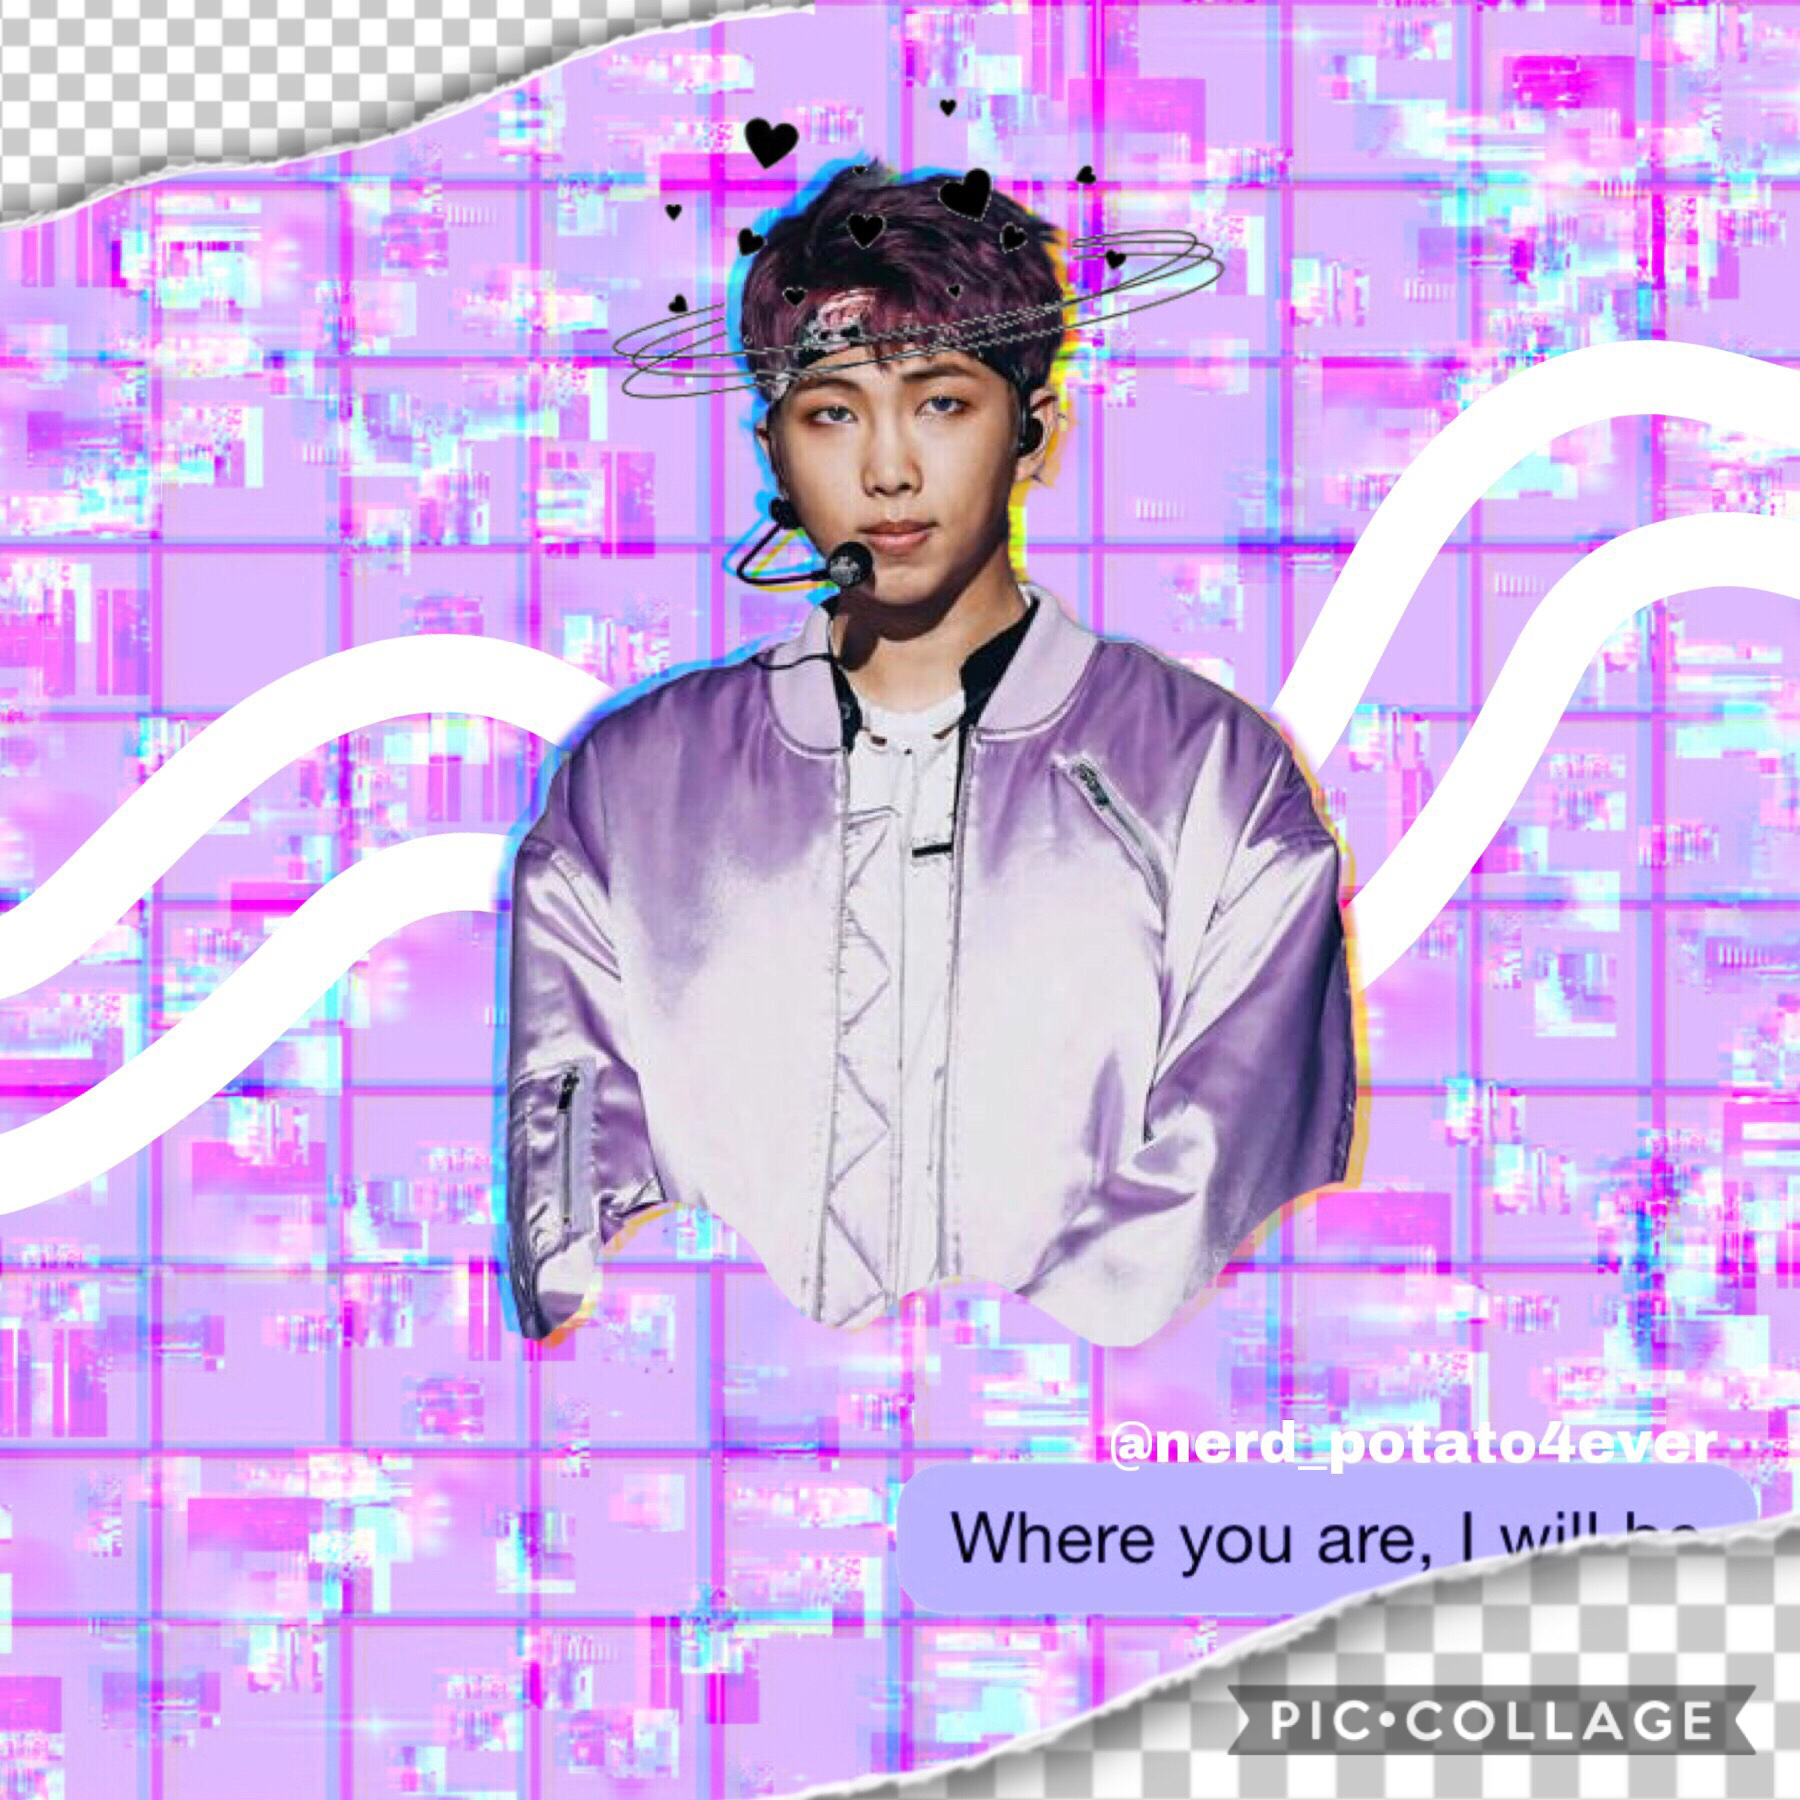 bro took me forever to make this 😪 I tried to the PicsArt thing where the grey and white checker thing abides to your regulations but instead I just found that sticker lol. I’m actually impressed by this edit, but I can’t do it the way just PicsArt (and m